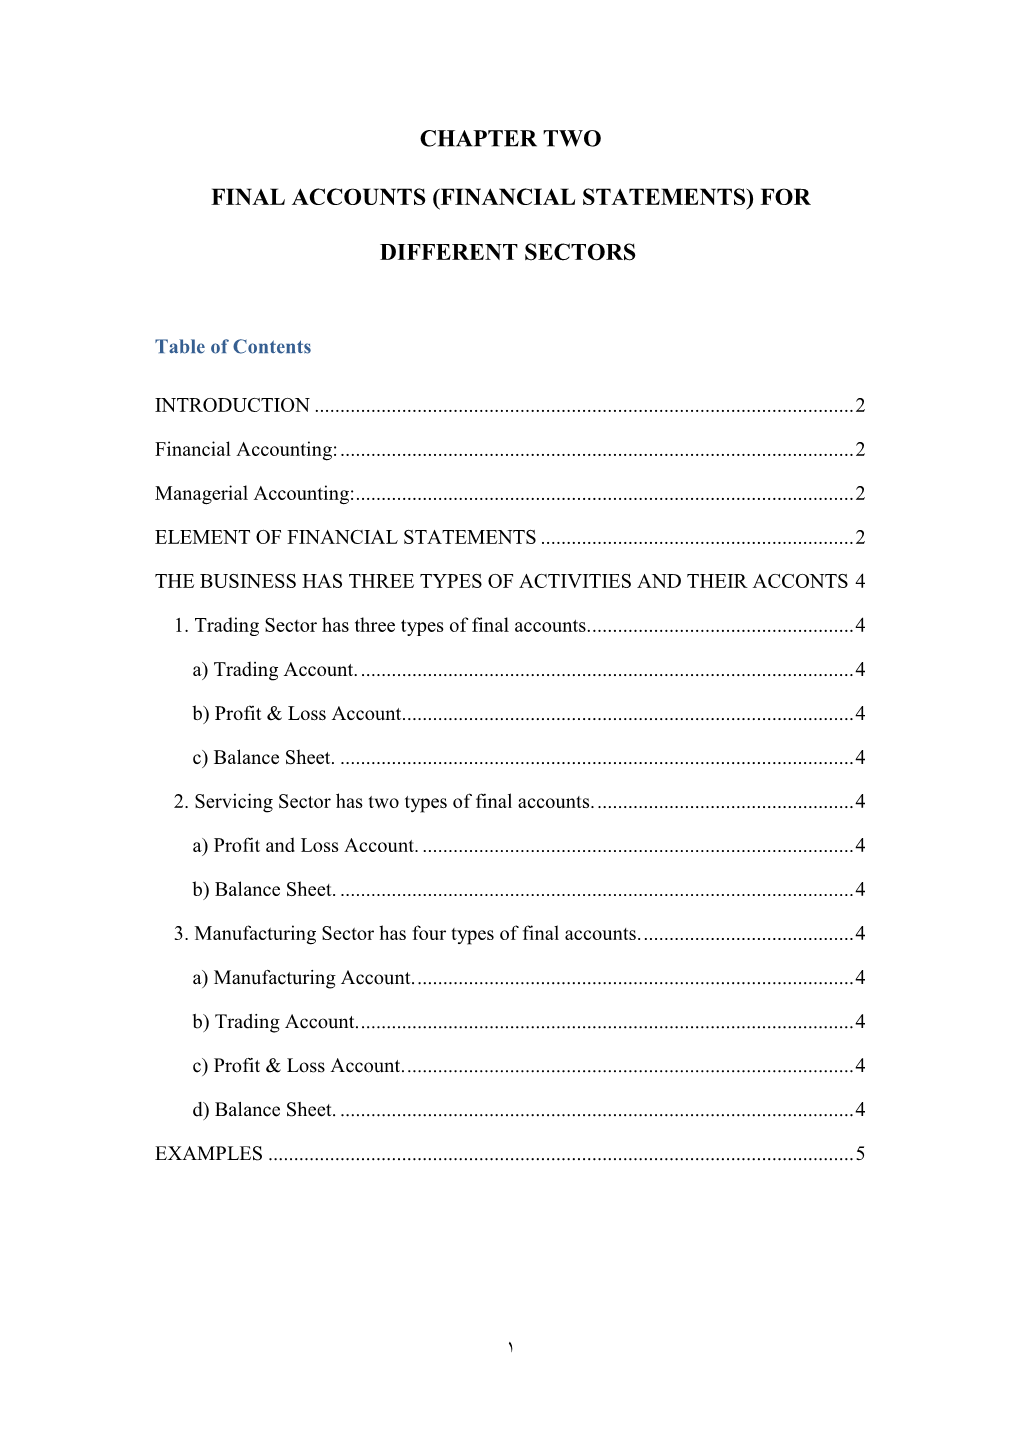 Chapter Two Final Accounts (Financial Statements)